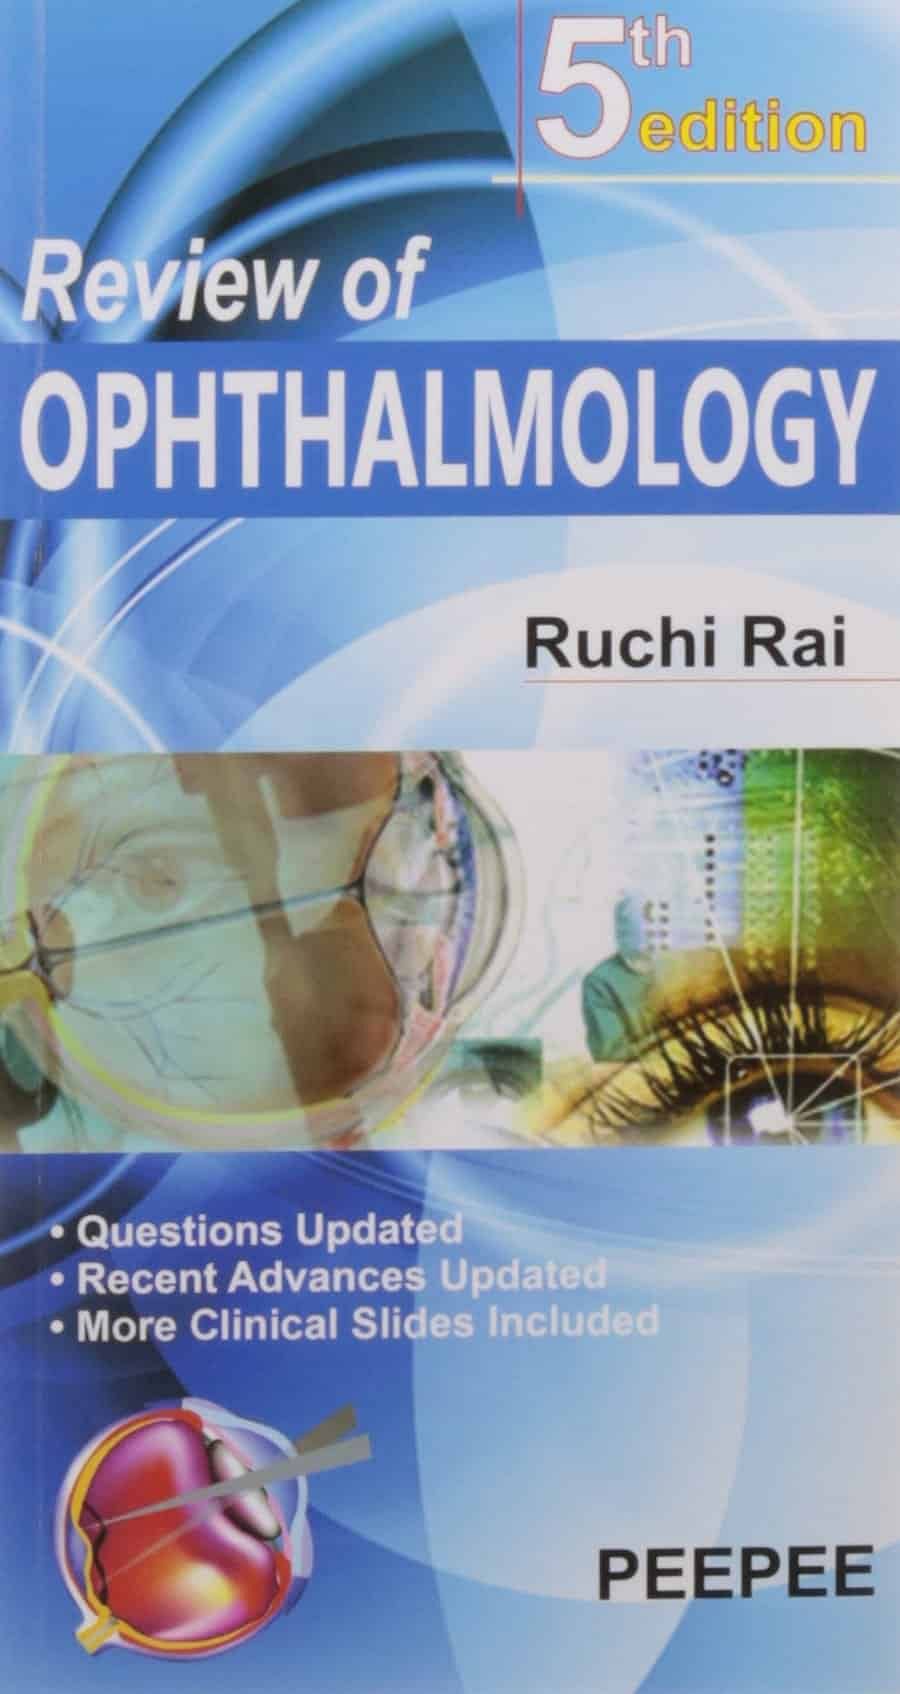 Review of Ophthalmology by Ruchi Rai